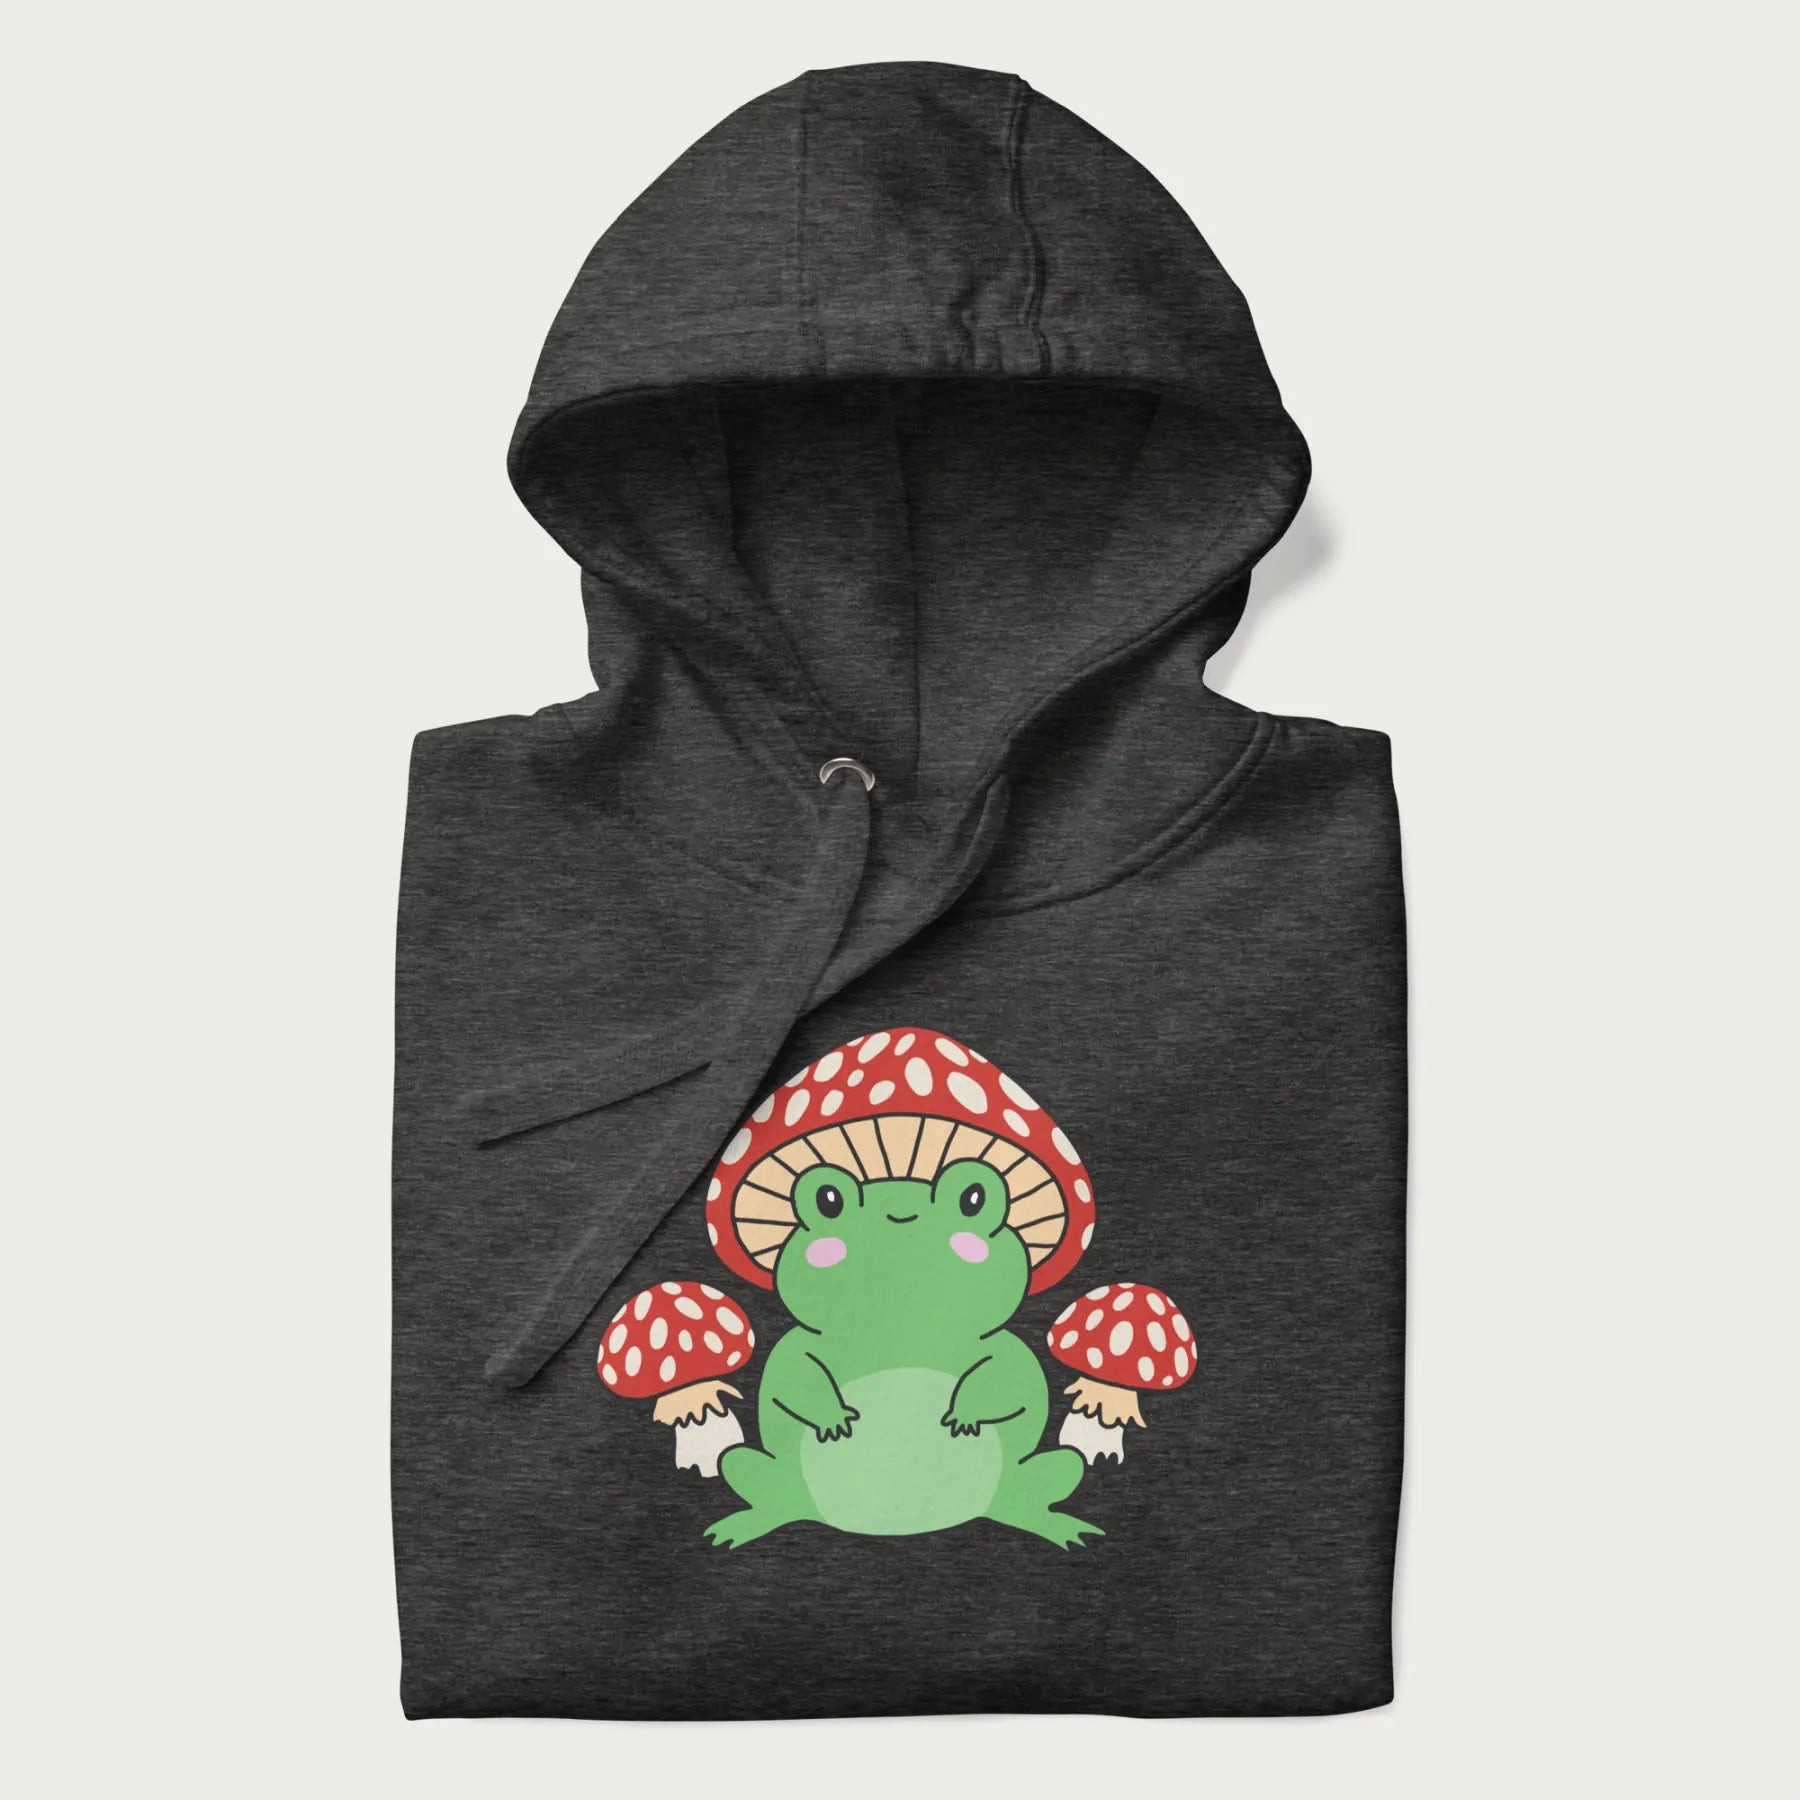 Folded dark grey hoodie will illustration of a cute green frog with red and white mushrooms.